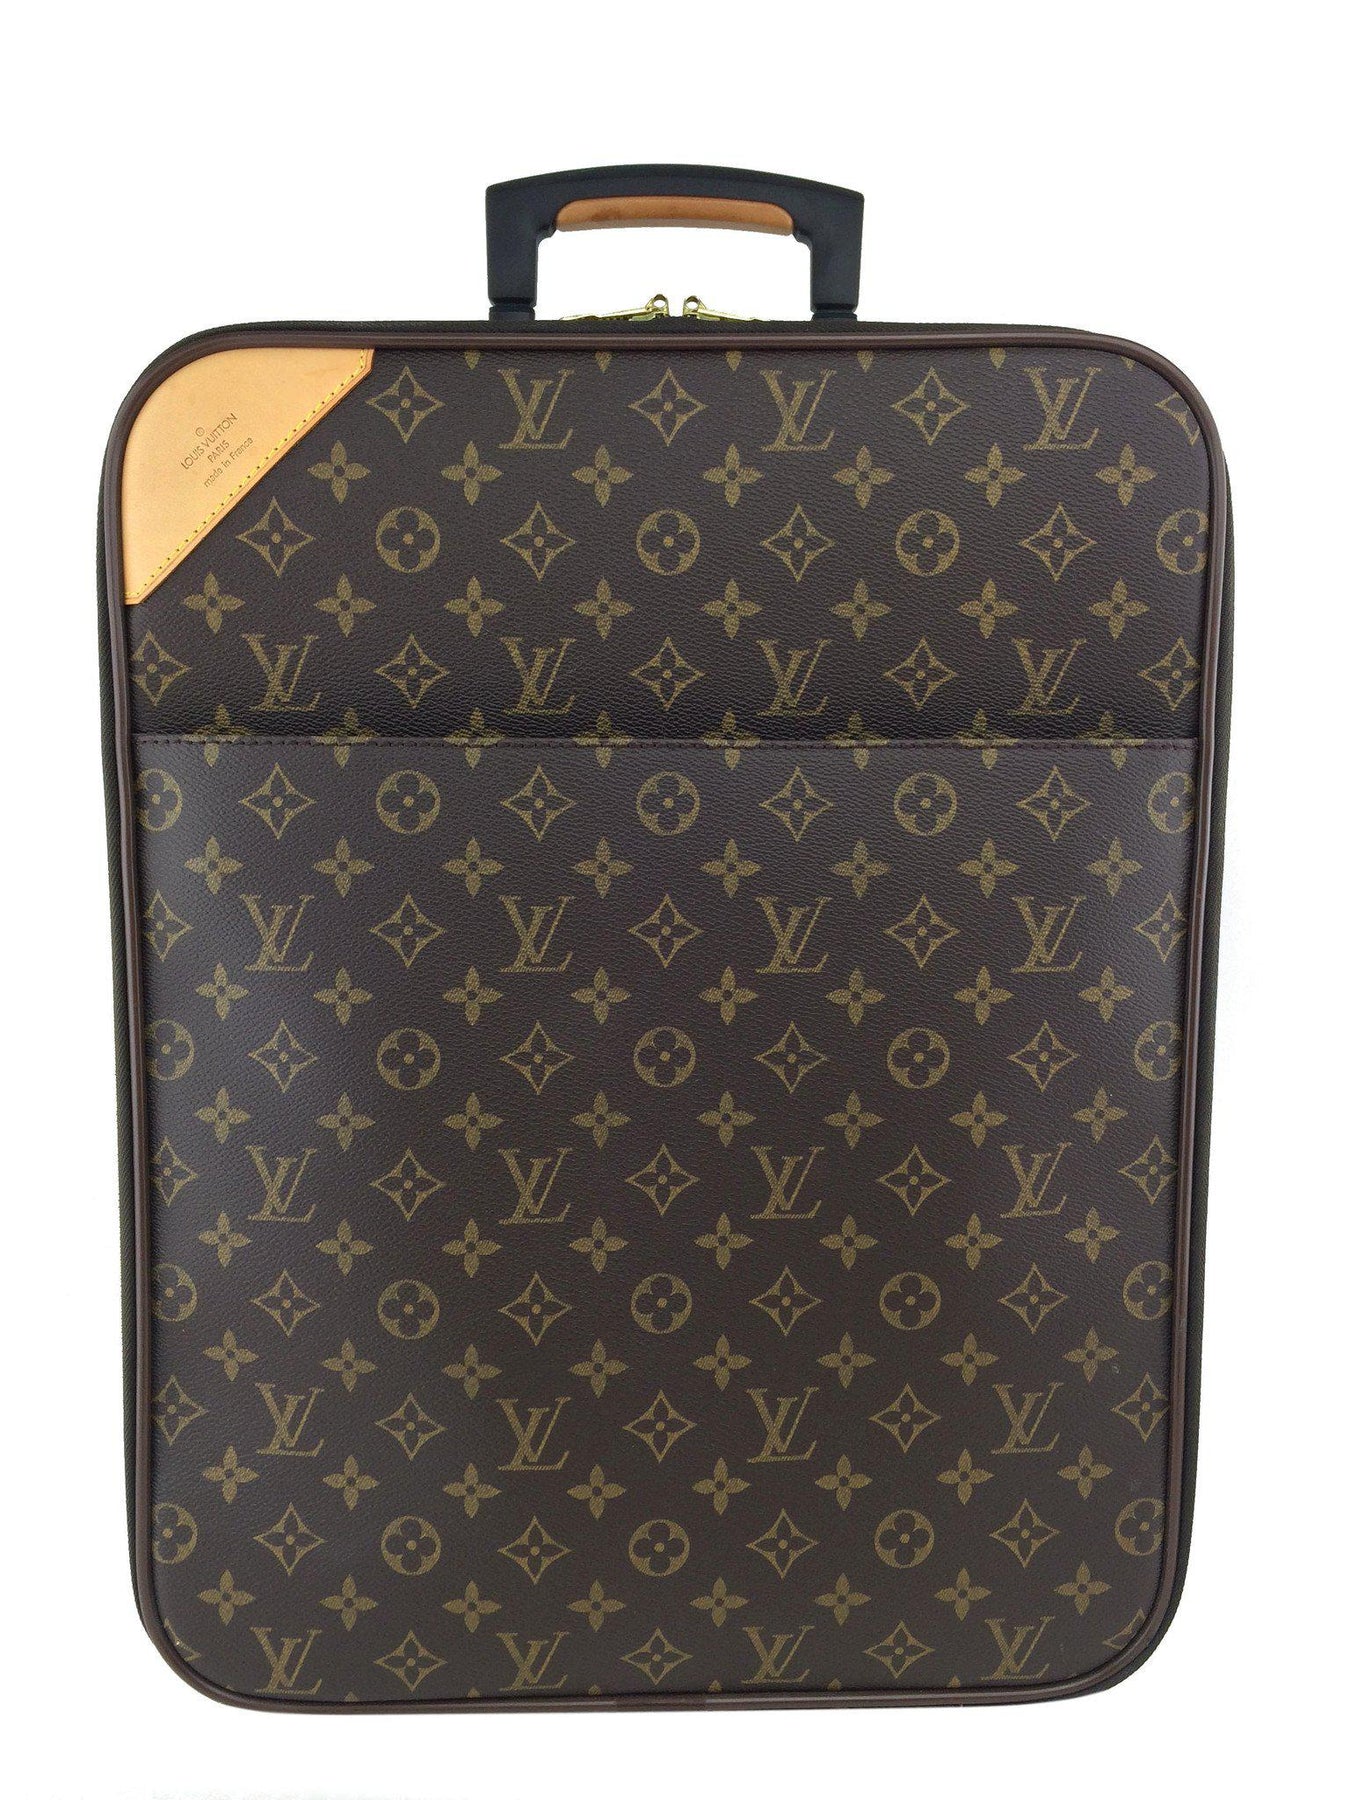 Louis Vuitton Canvas Travel Luggage with Wheels/Rolling for sale